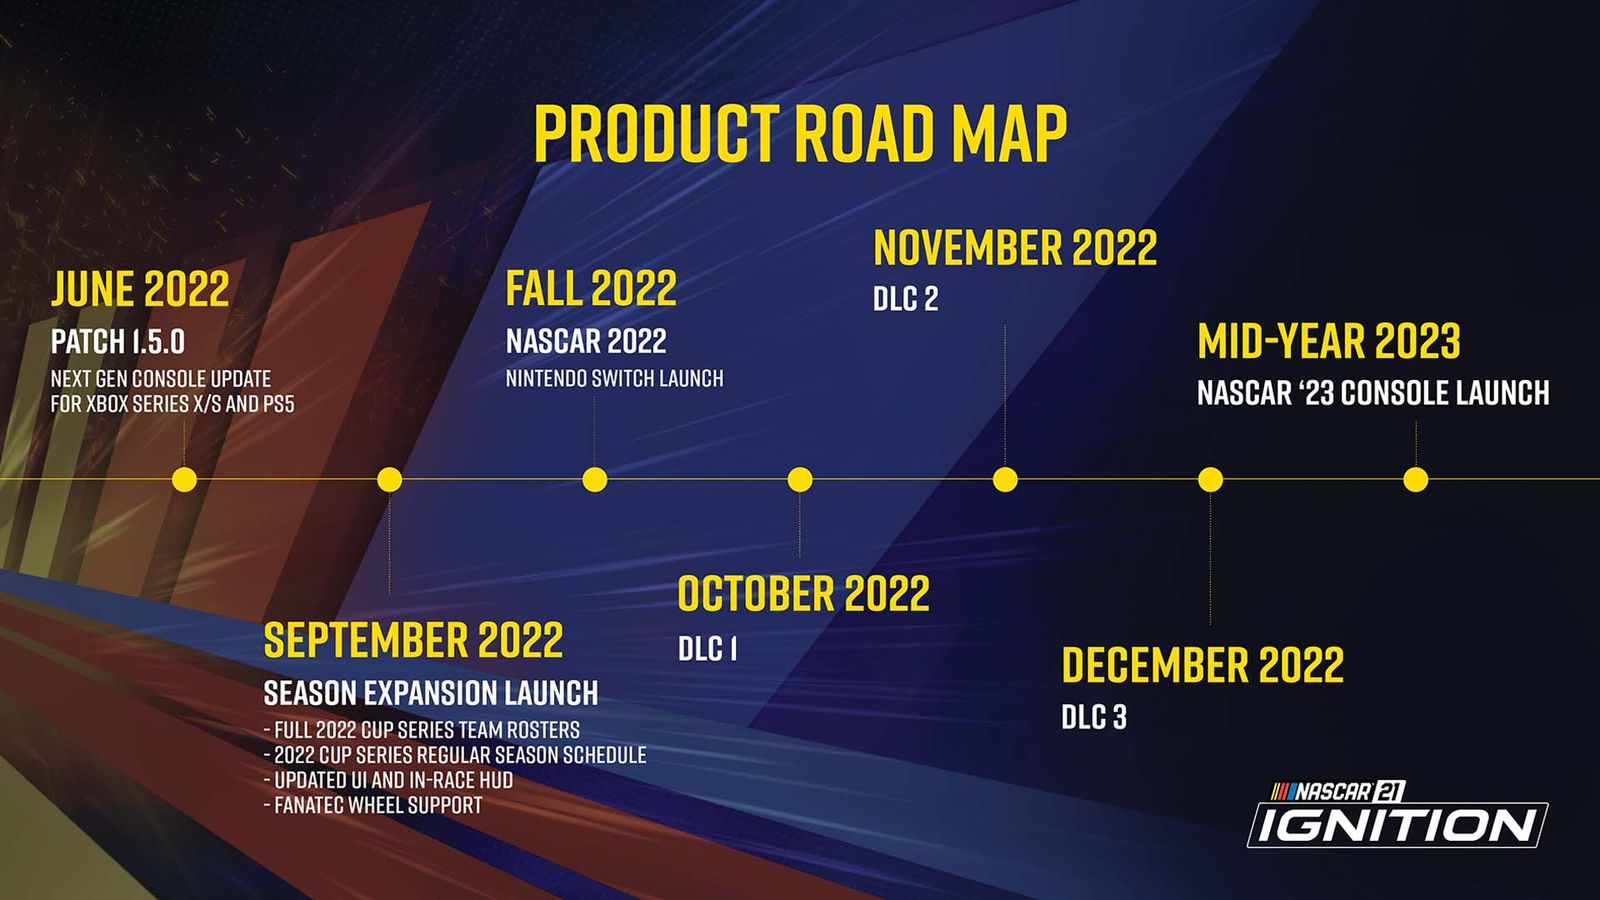 NASCAR 21: Ignition product road map